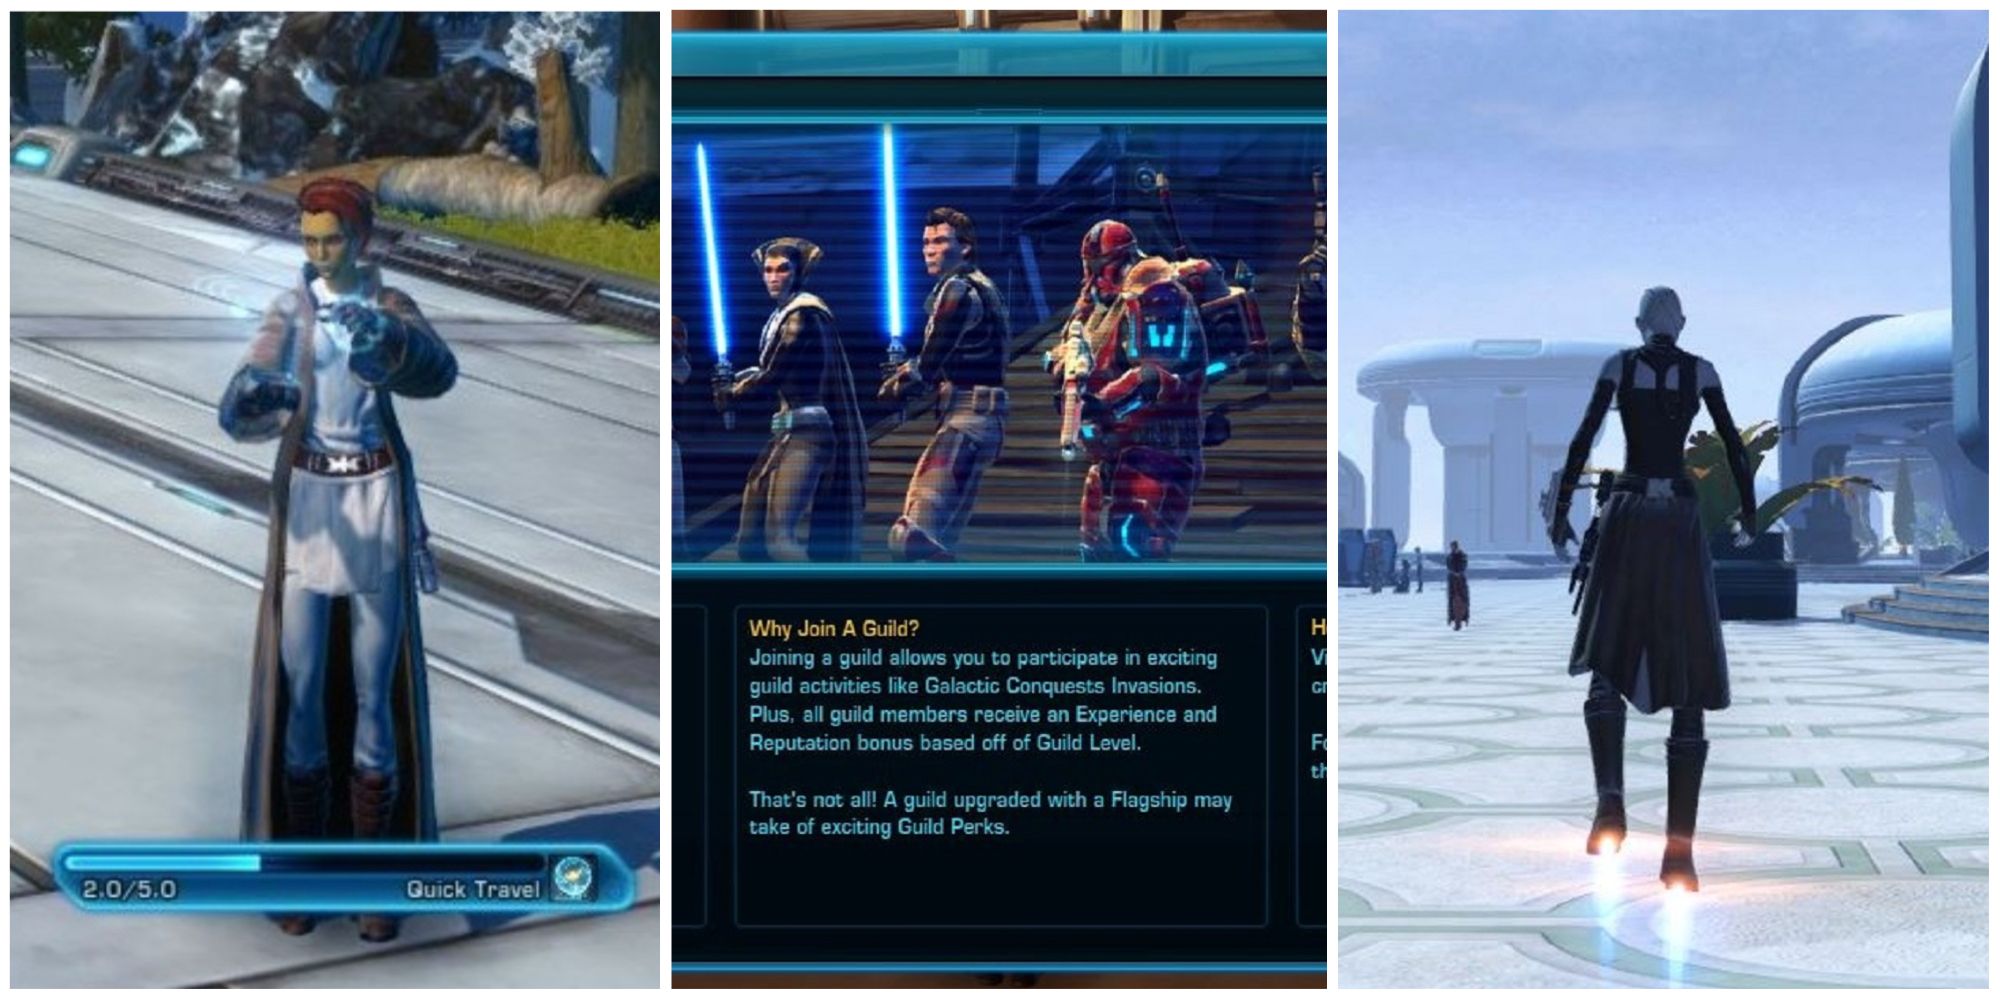 SWTOR quick travel, guild window, and rocket boost